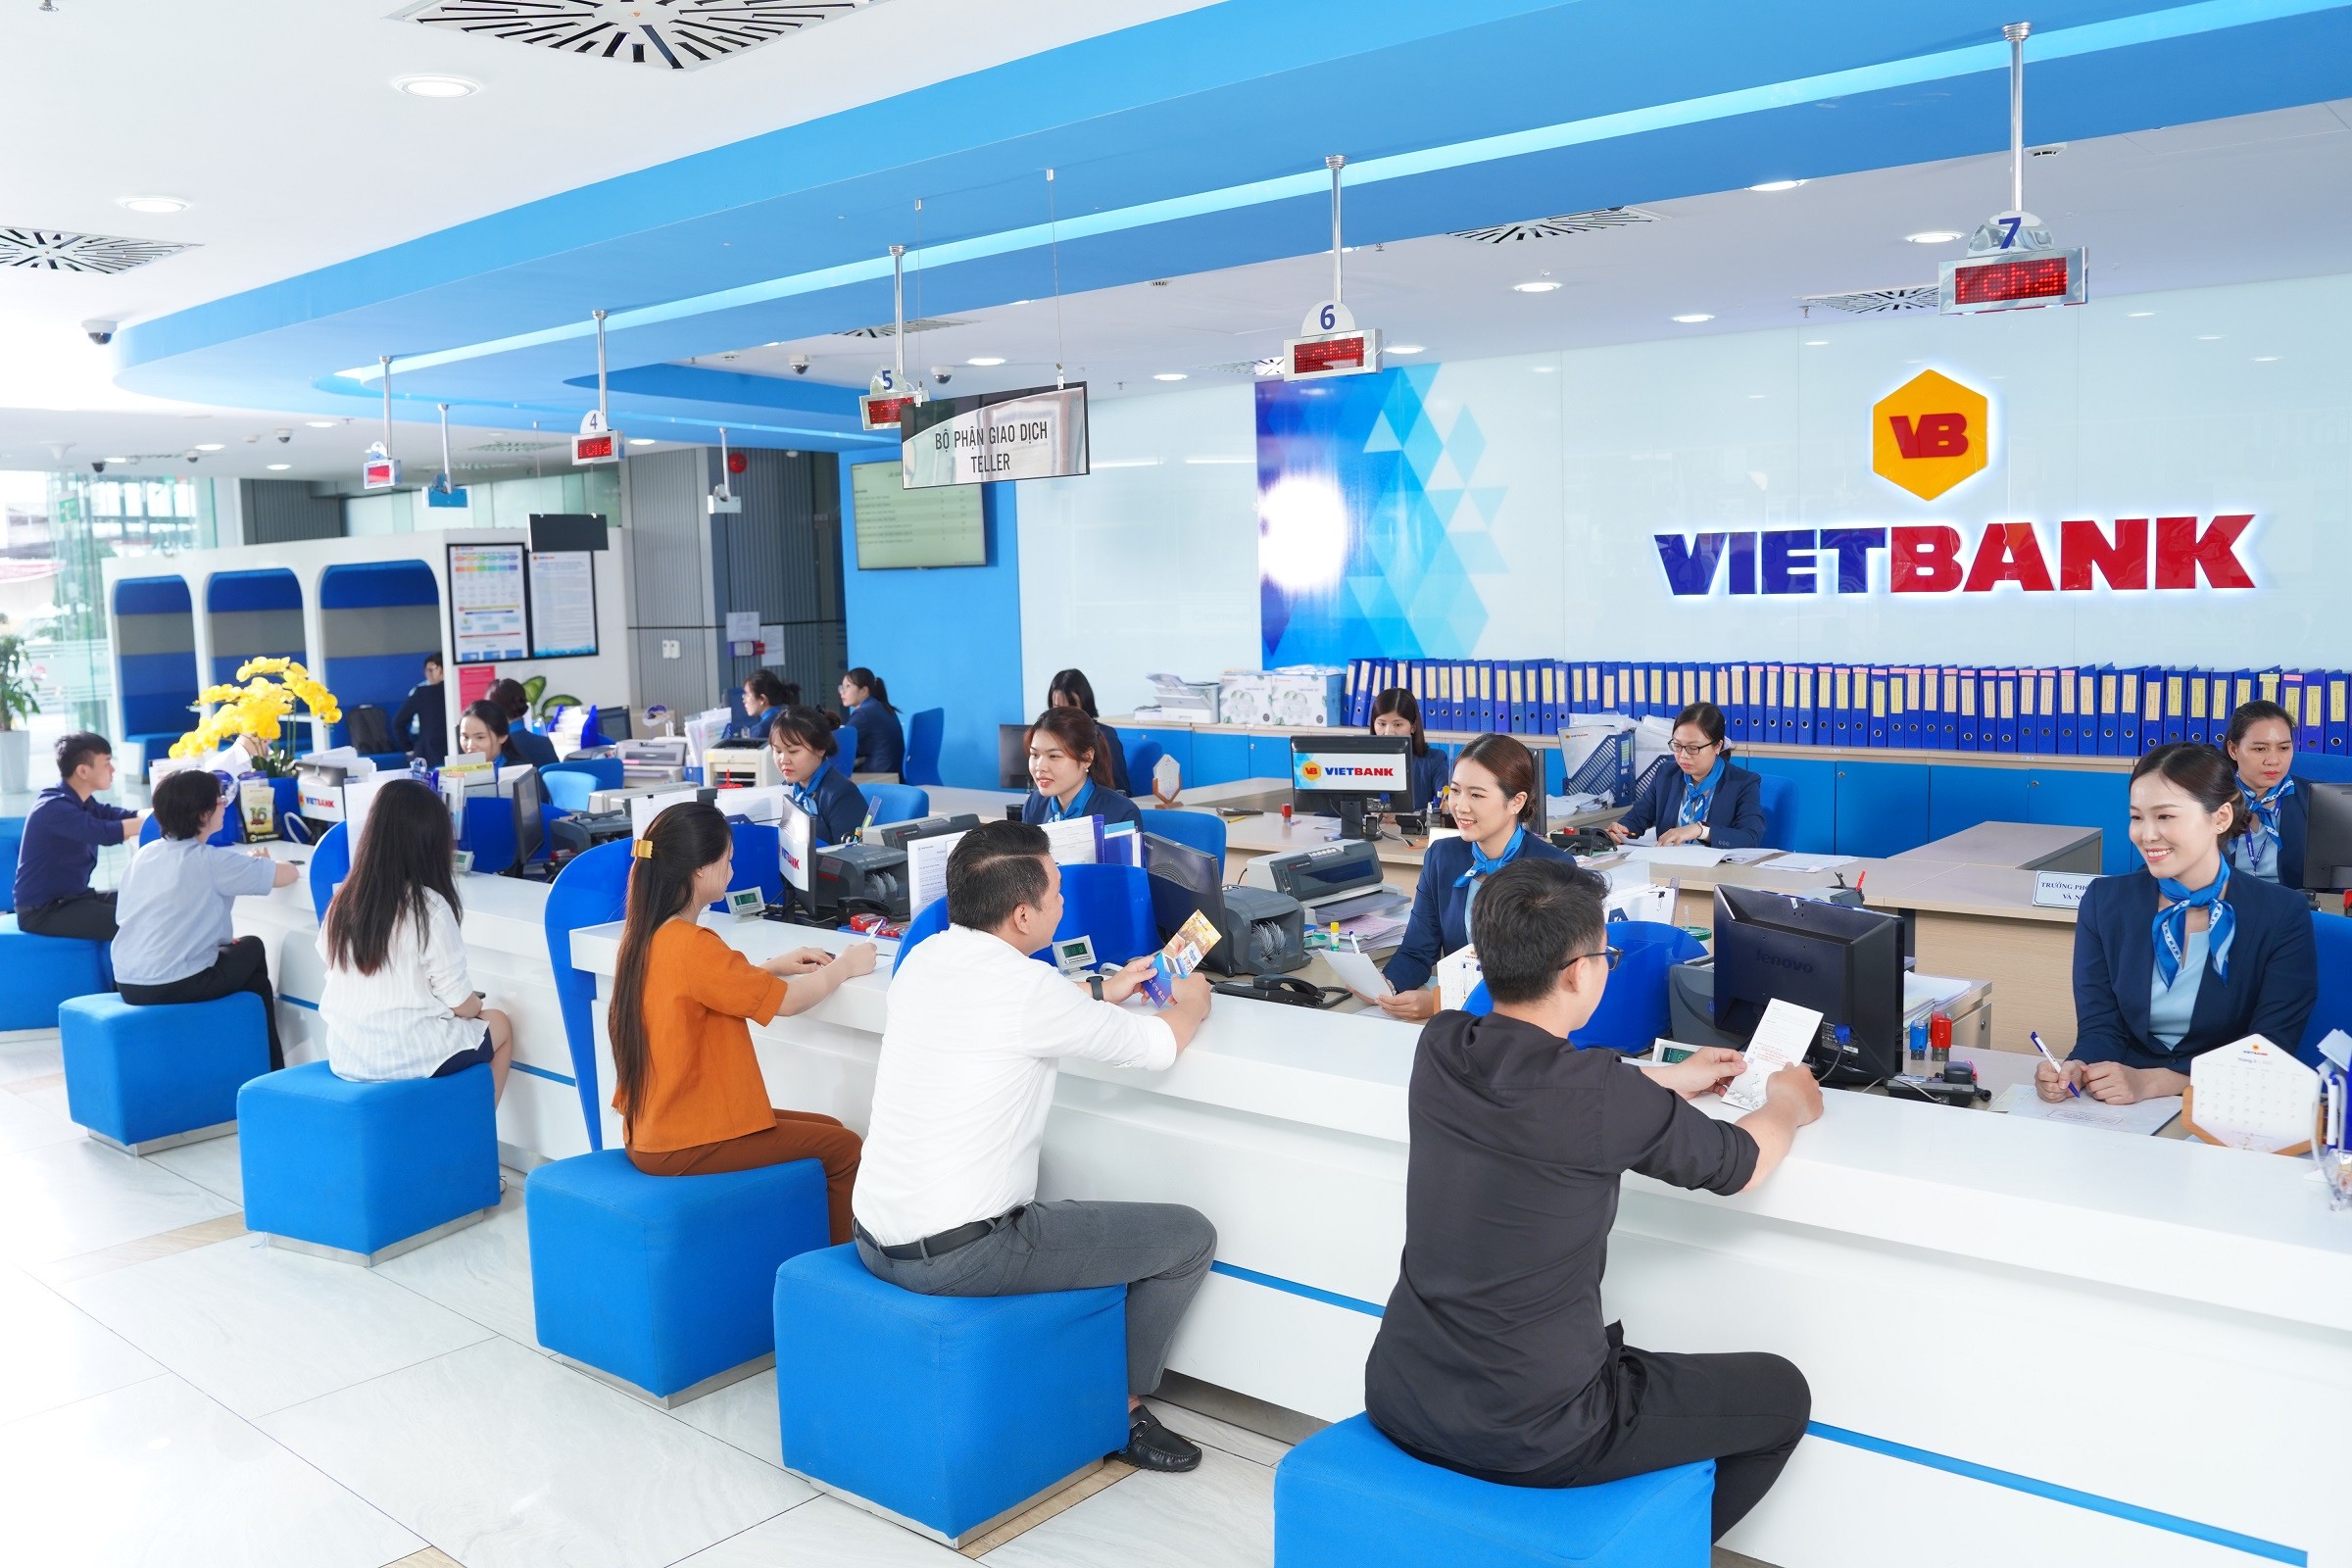 hinh-canh-giao-dich-vietbank-1682470836.JPG